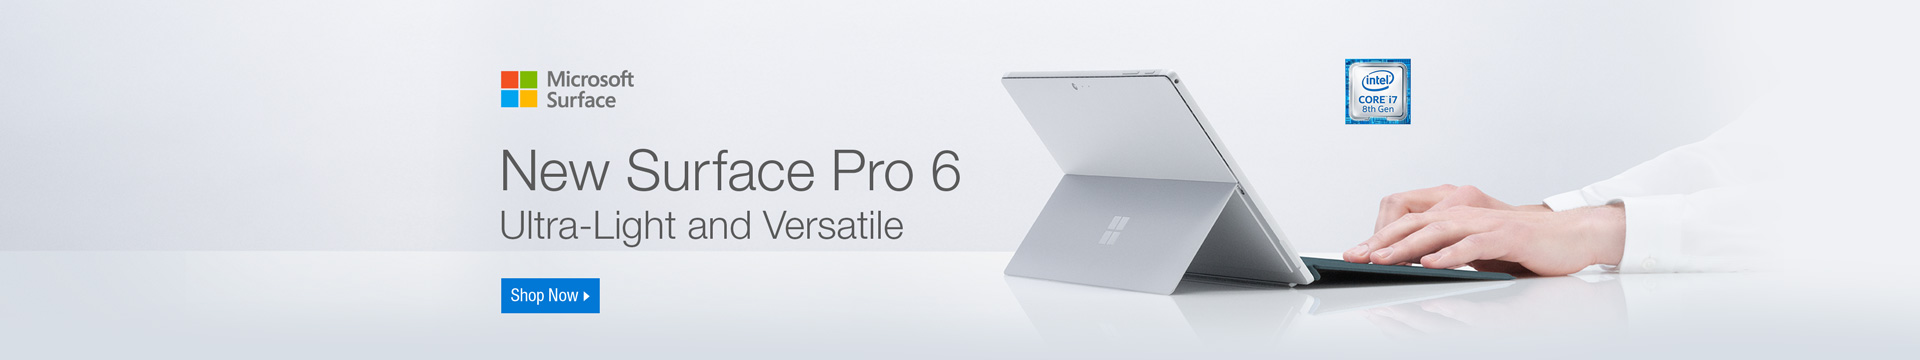 New Surface Pro 6